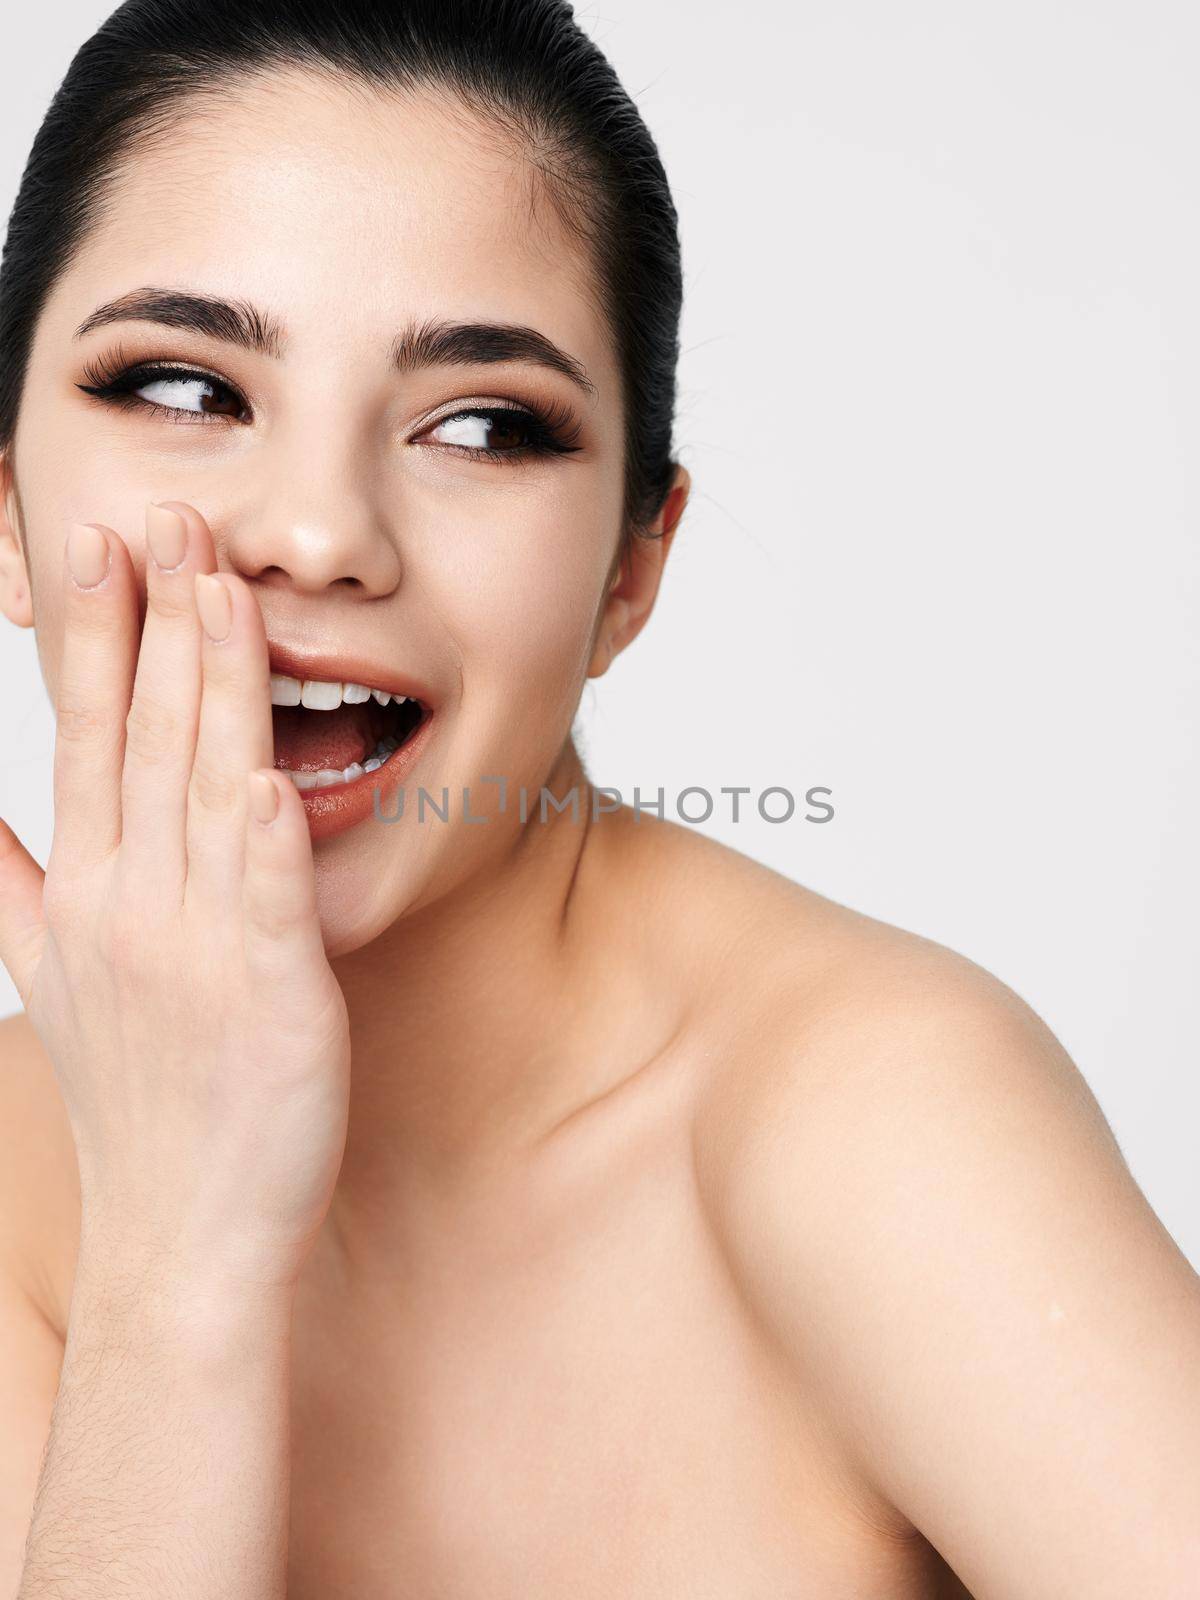 cheerful woman covers her face with her hand emotions bare shoulders close-up. High quality photo